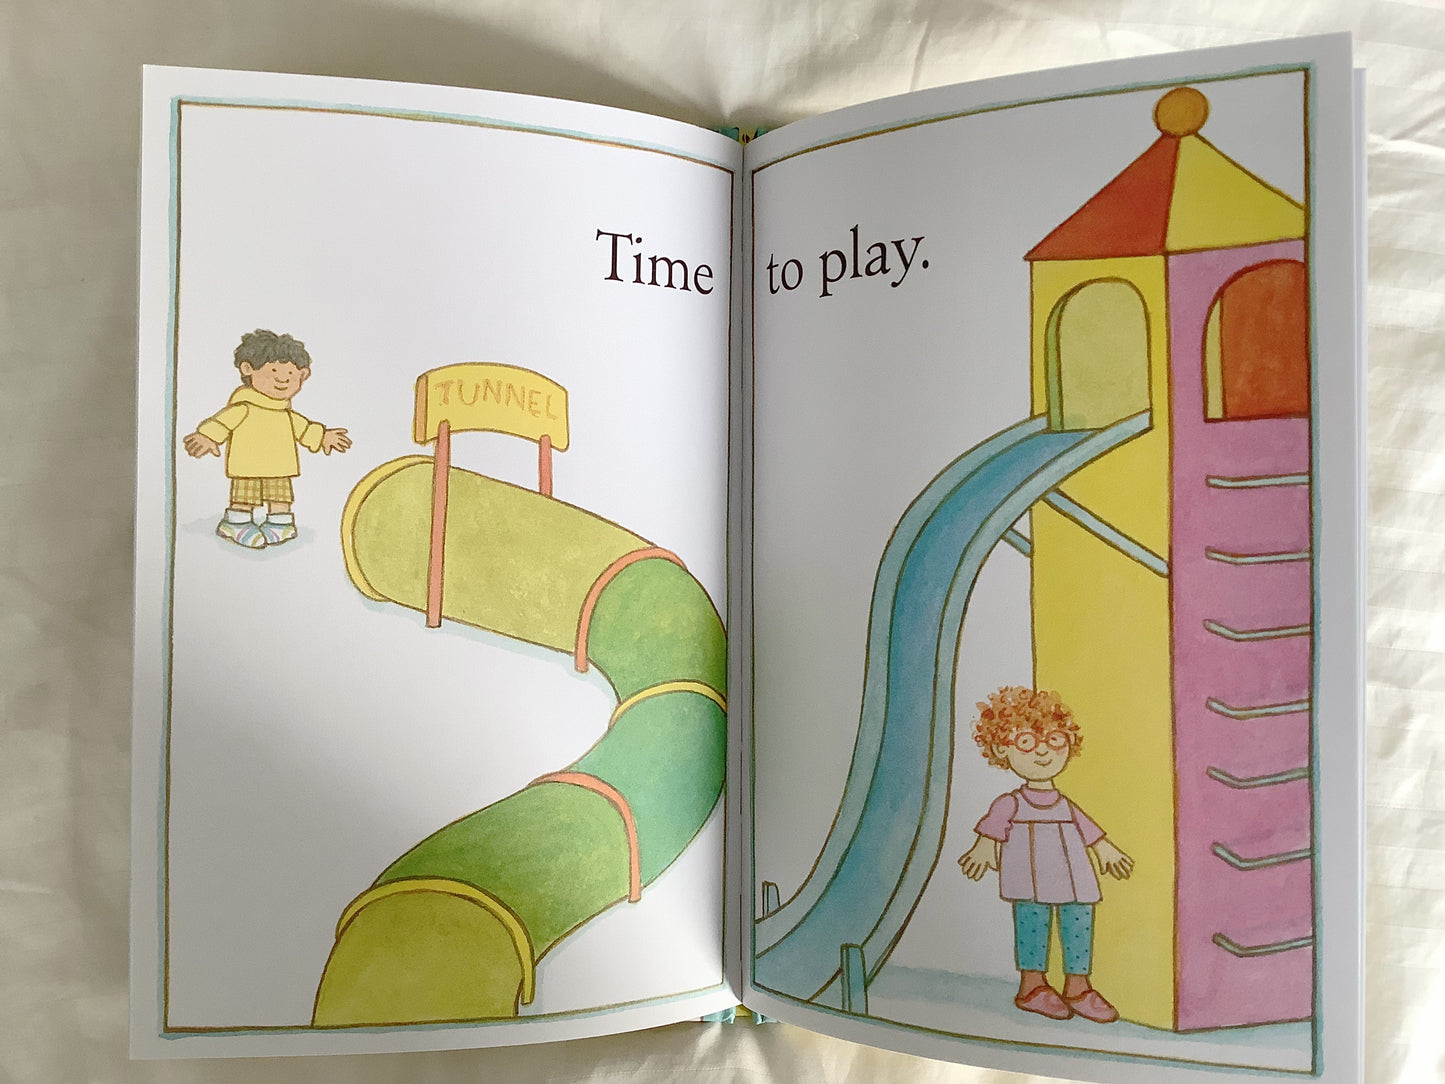 When Andy Met Sandy by Tomie dePaola